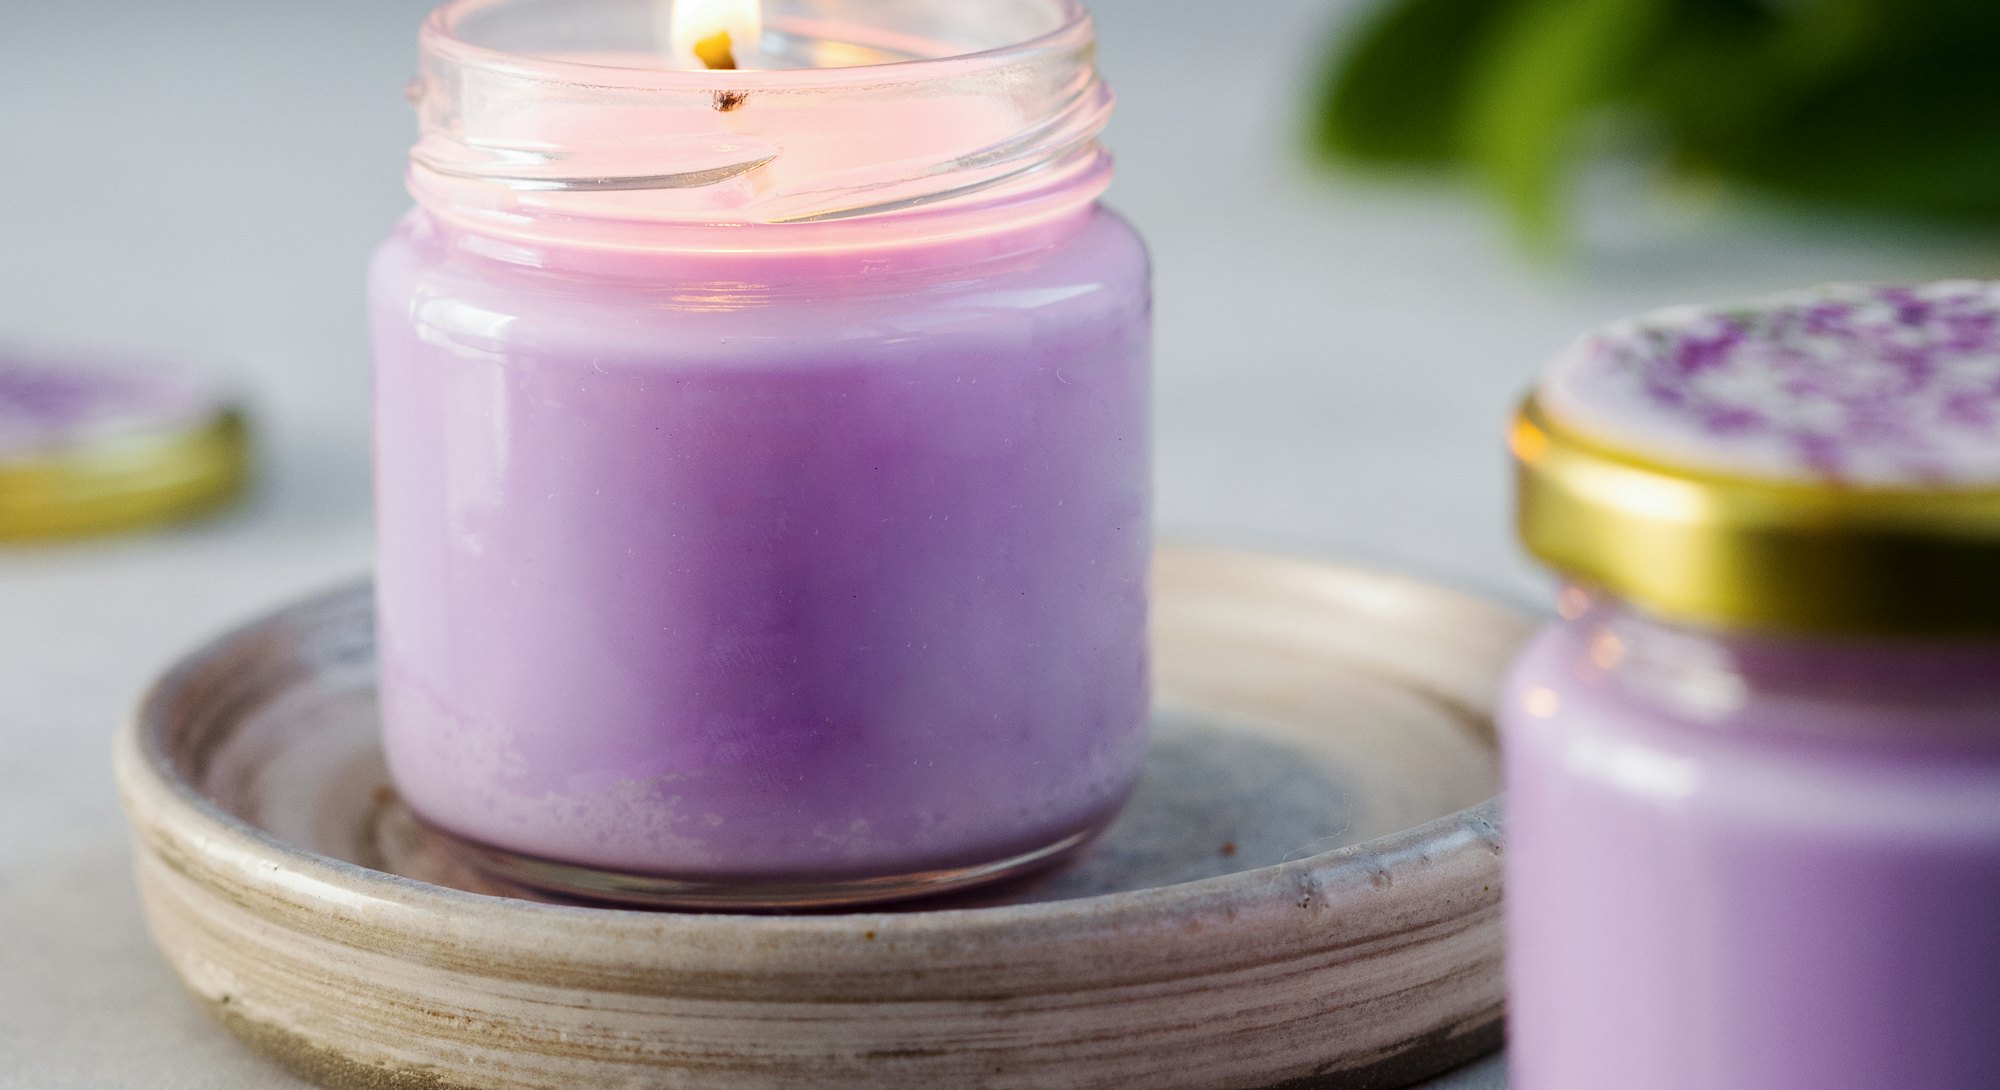 spring candles for every parenting moment